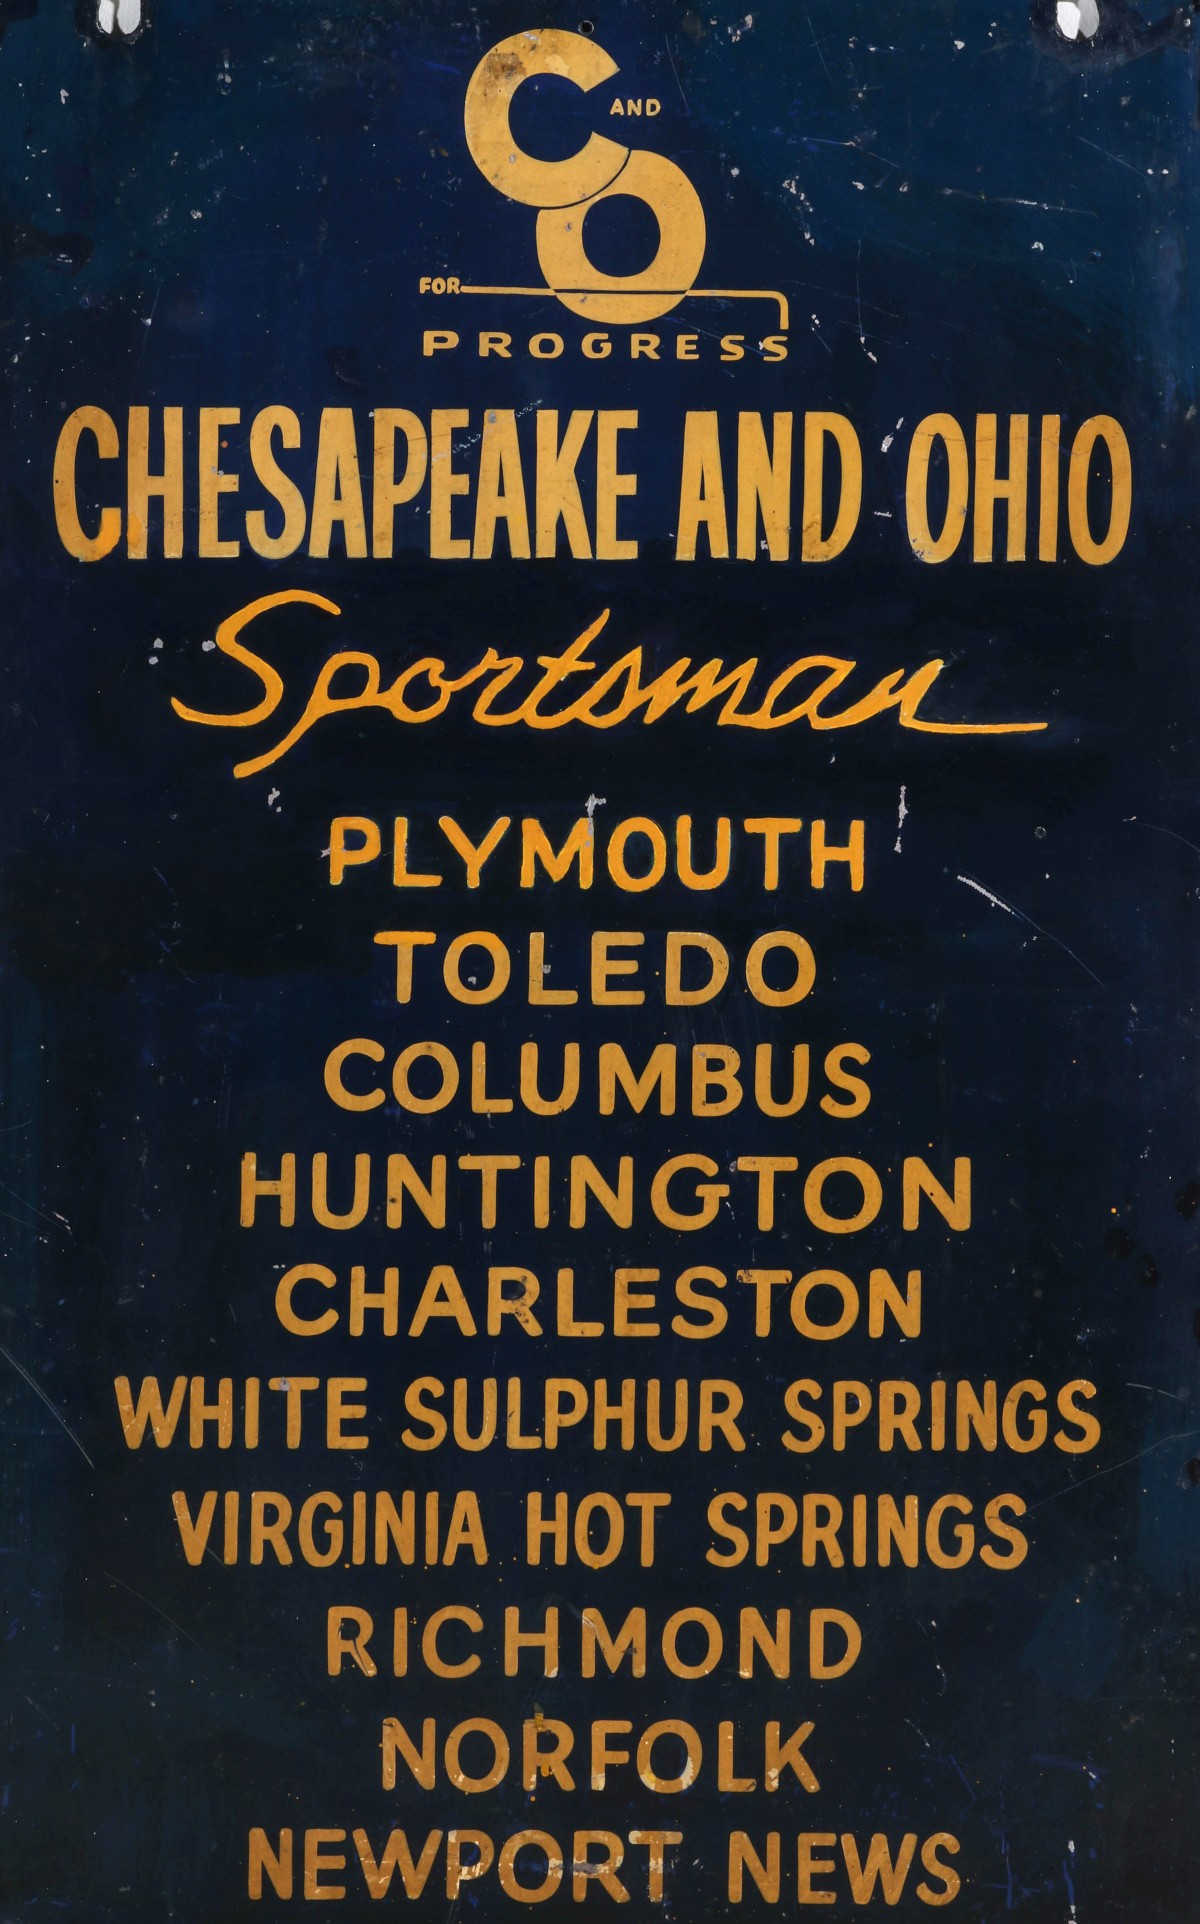 A CHESAPEAKE AND OHIO GATE SIGN FOR 'THE SPORTSMAN'